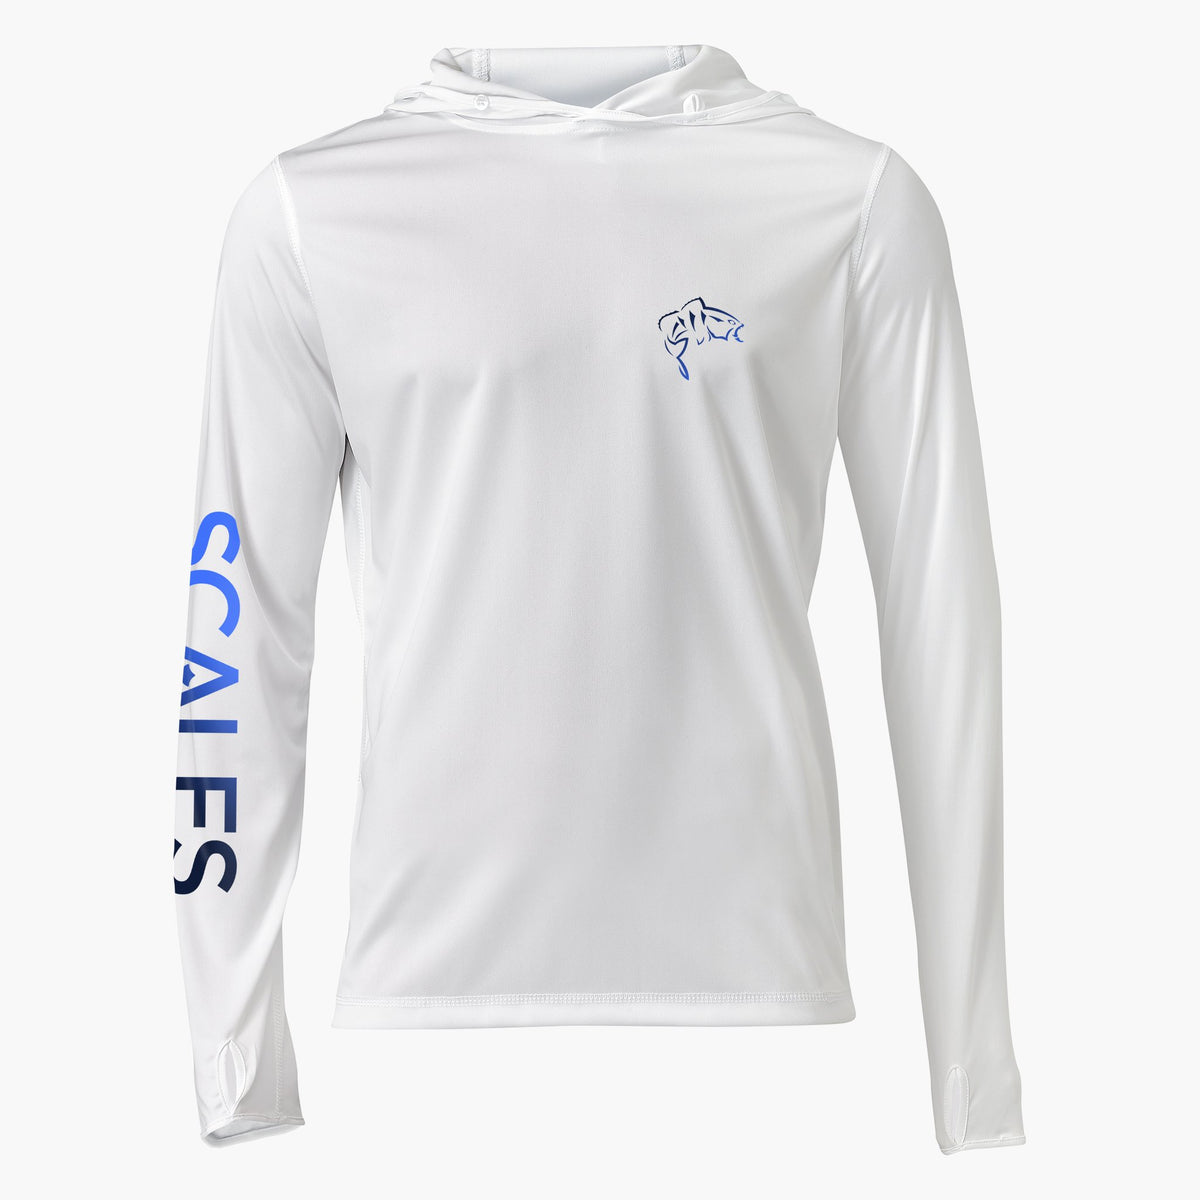 SCALES PRO Iconic Walleye Long Sleeve Performance